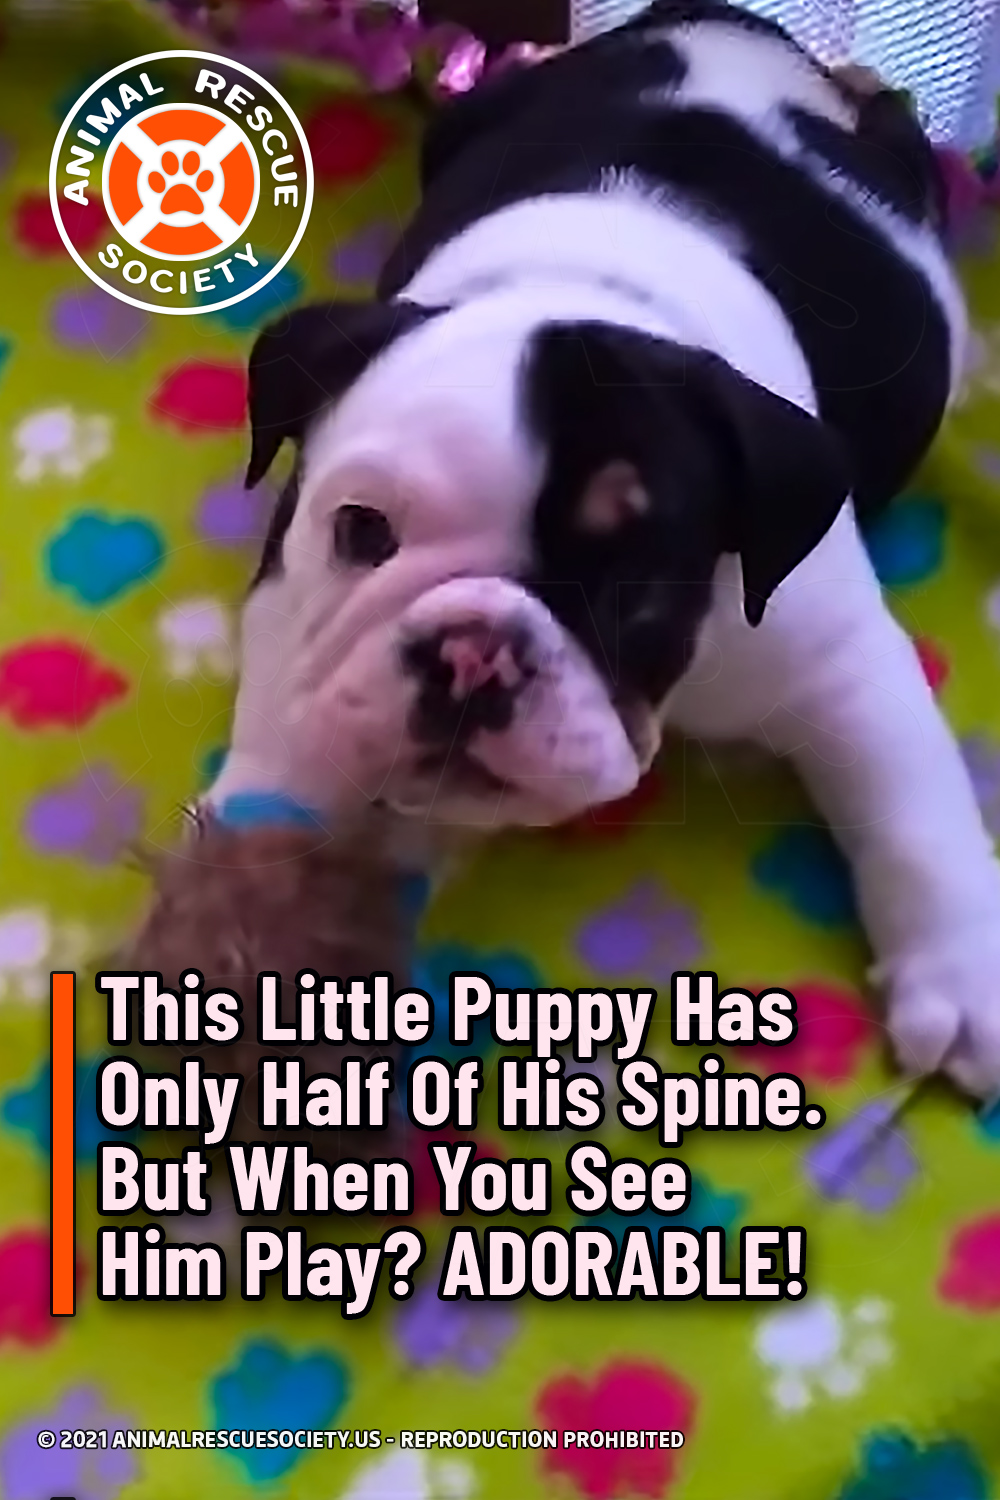 This Little Puppy Has Only Half Of His Spine. But When You See Him Play? ADORABLE!